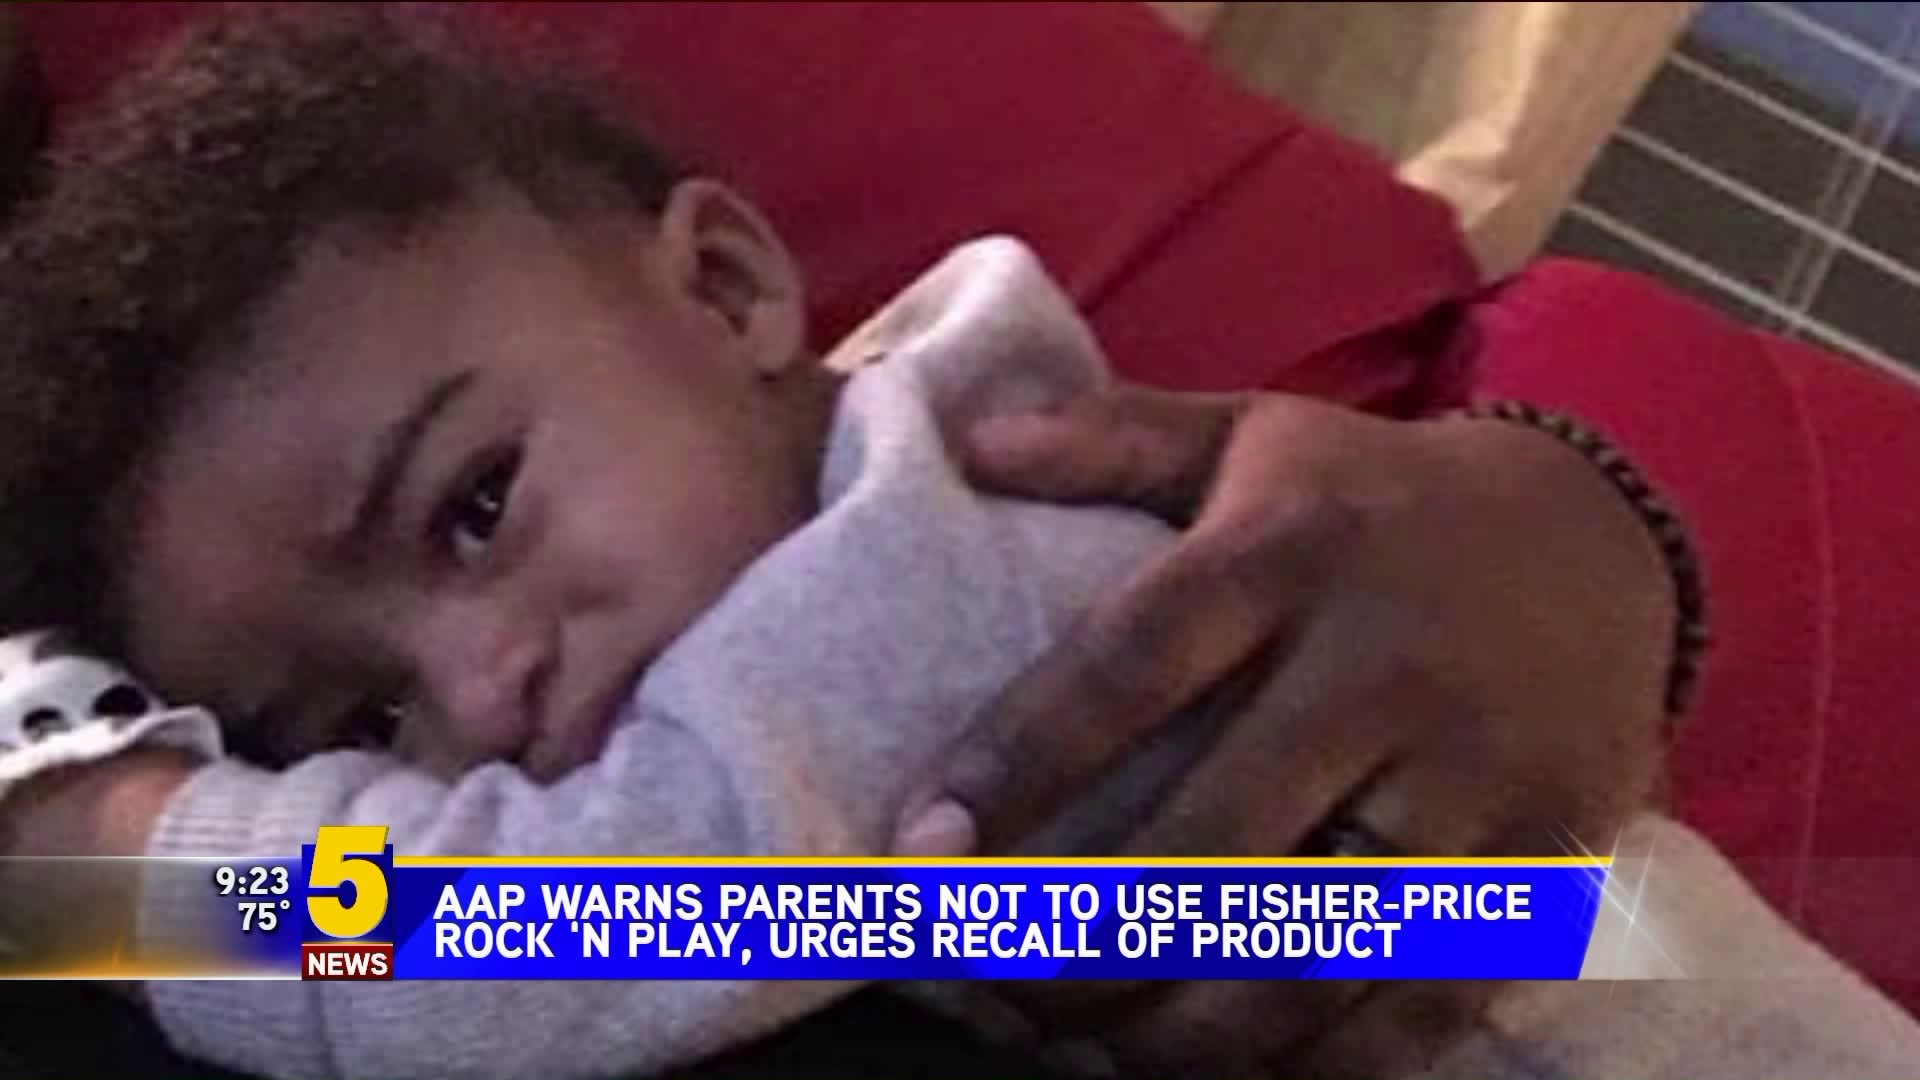 AAP Warns Parents About Rock n Play